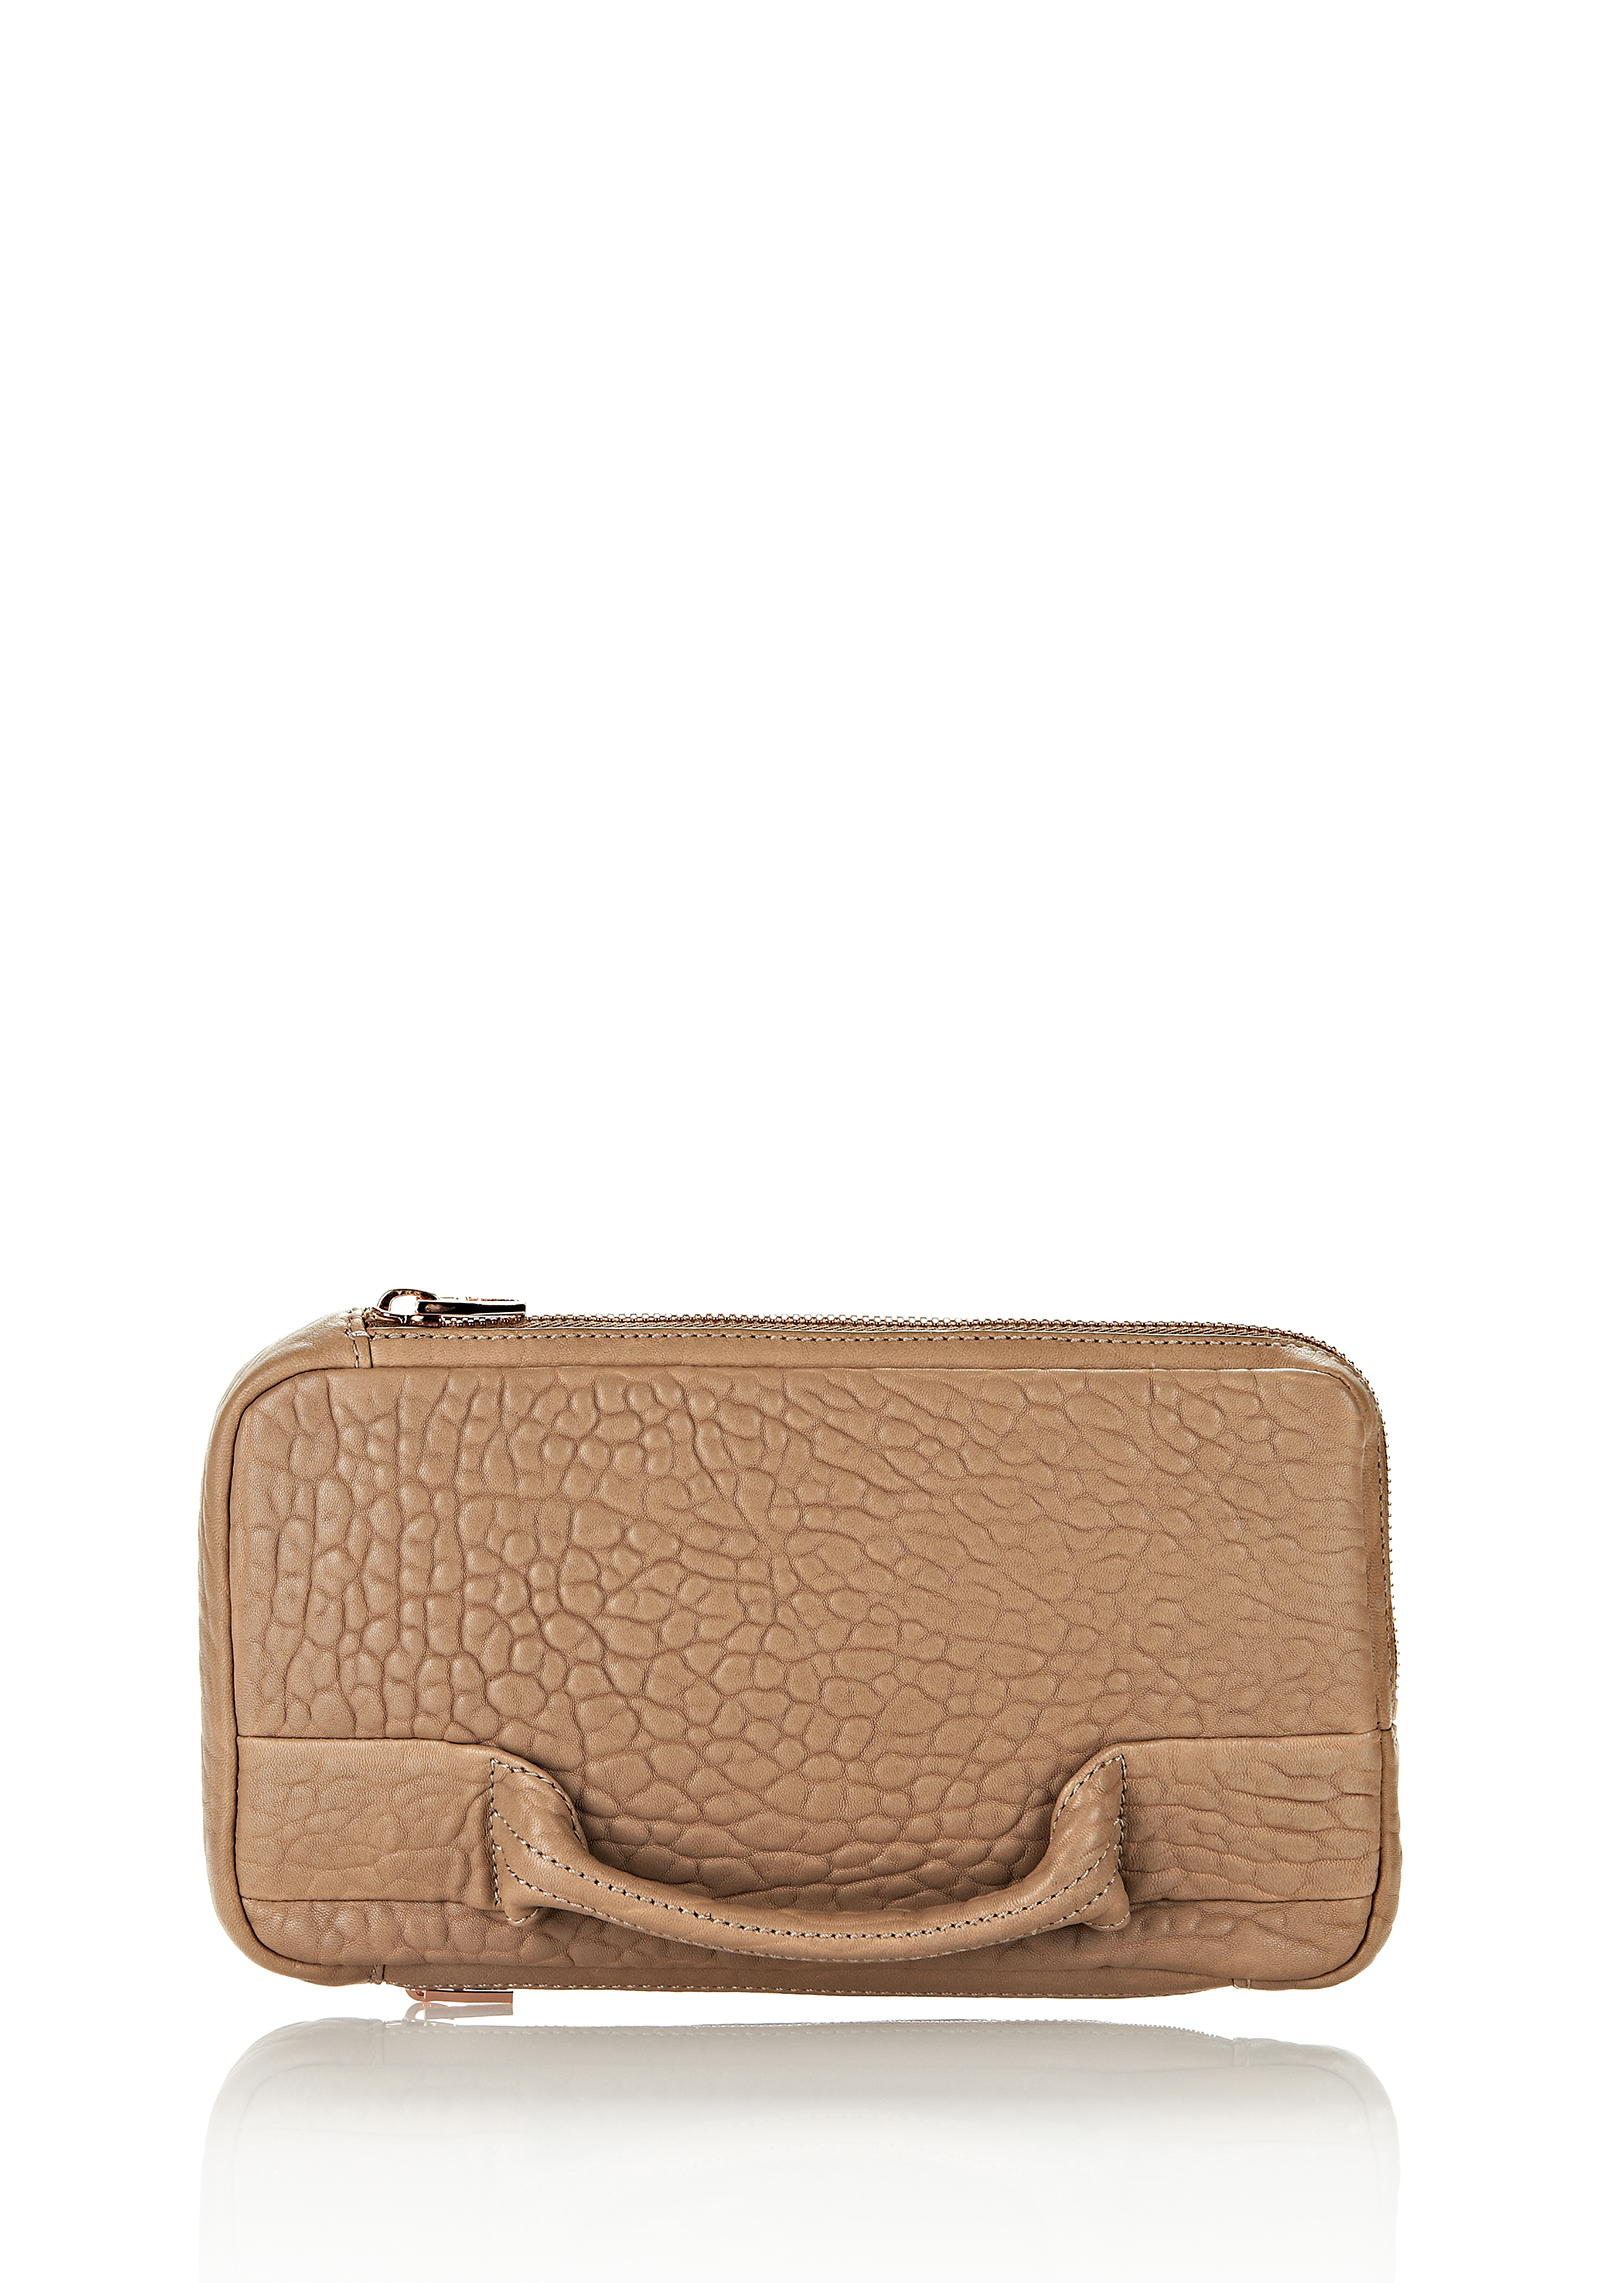 Lyst - Alexander Wang Soft Clutch in Latte Dumbo with Rosegold in Brown